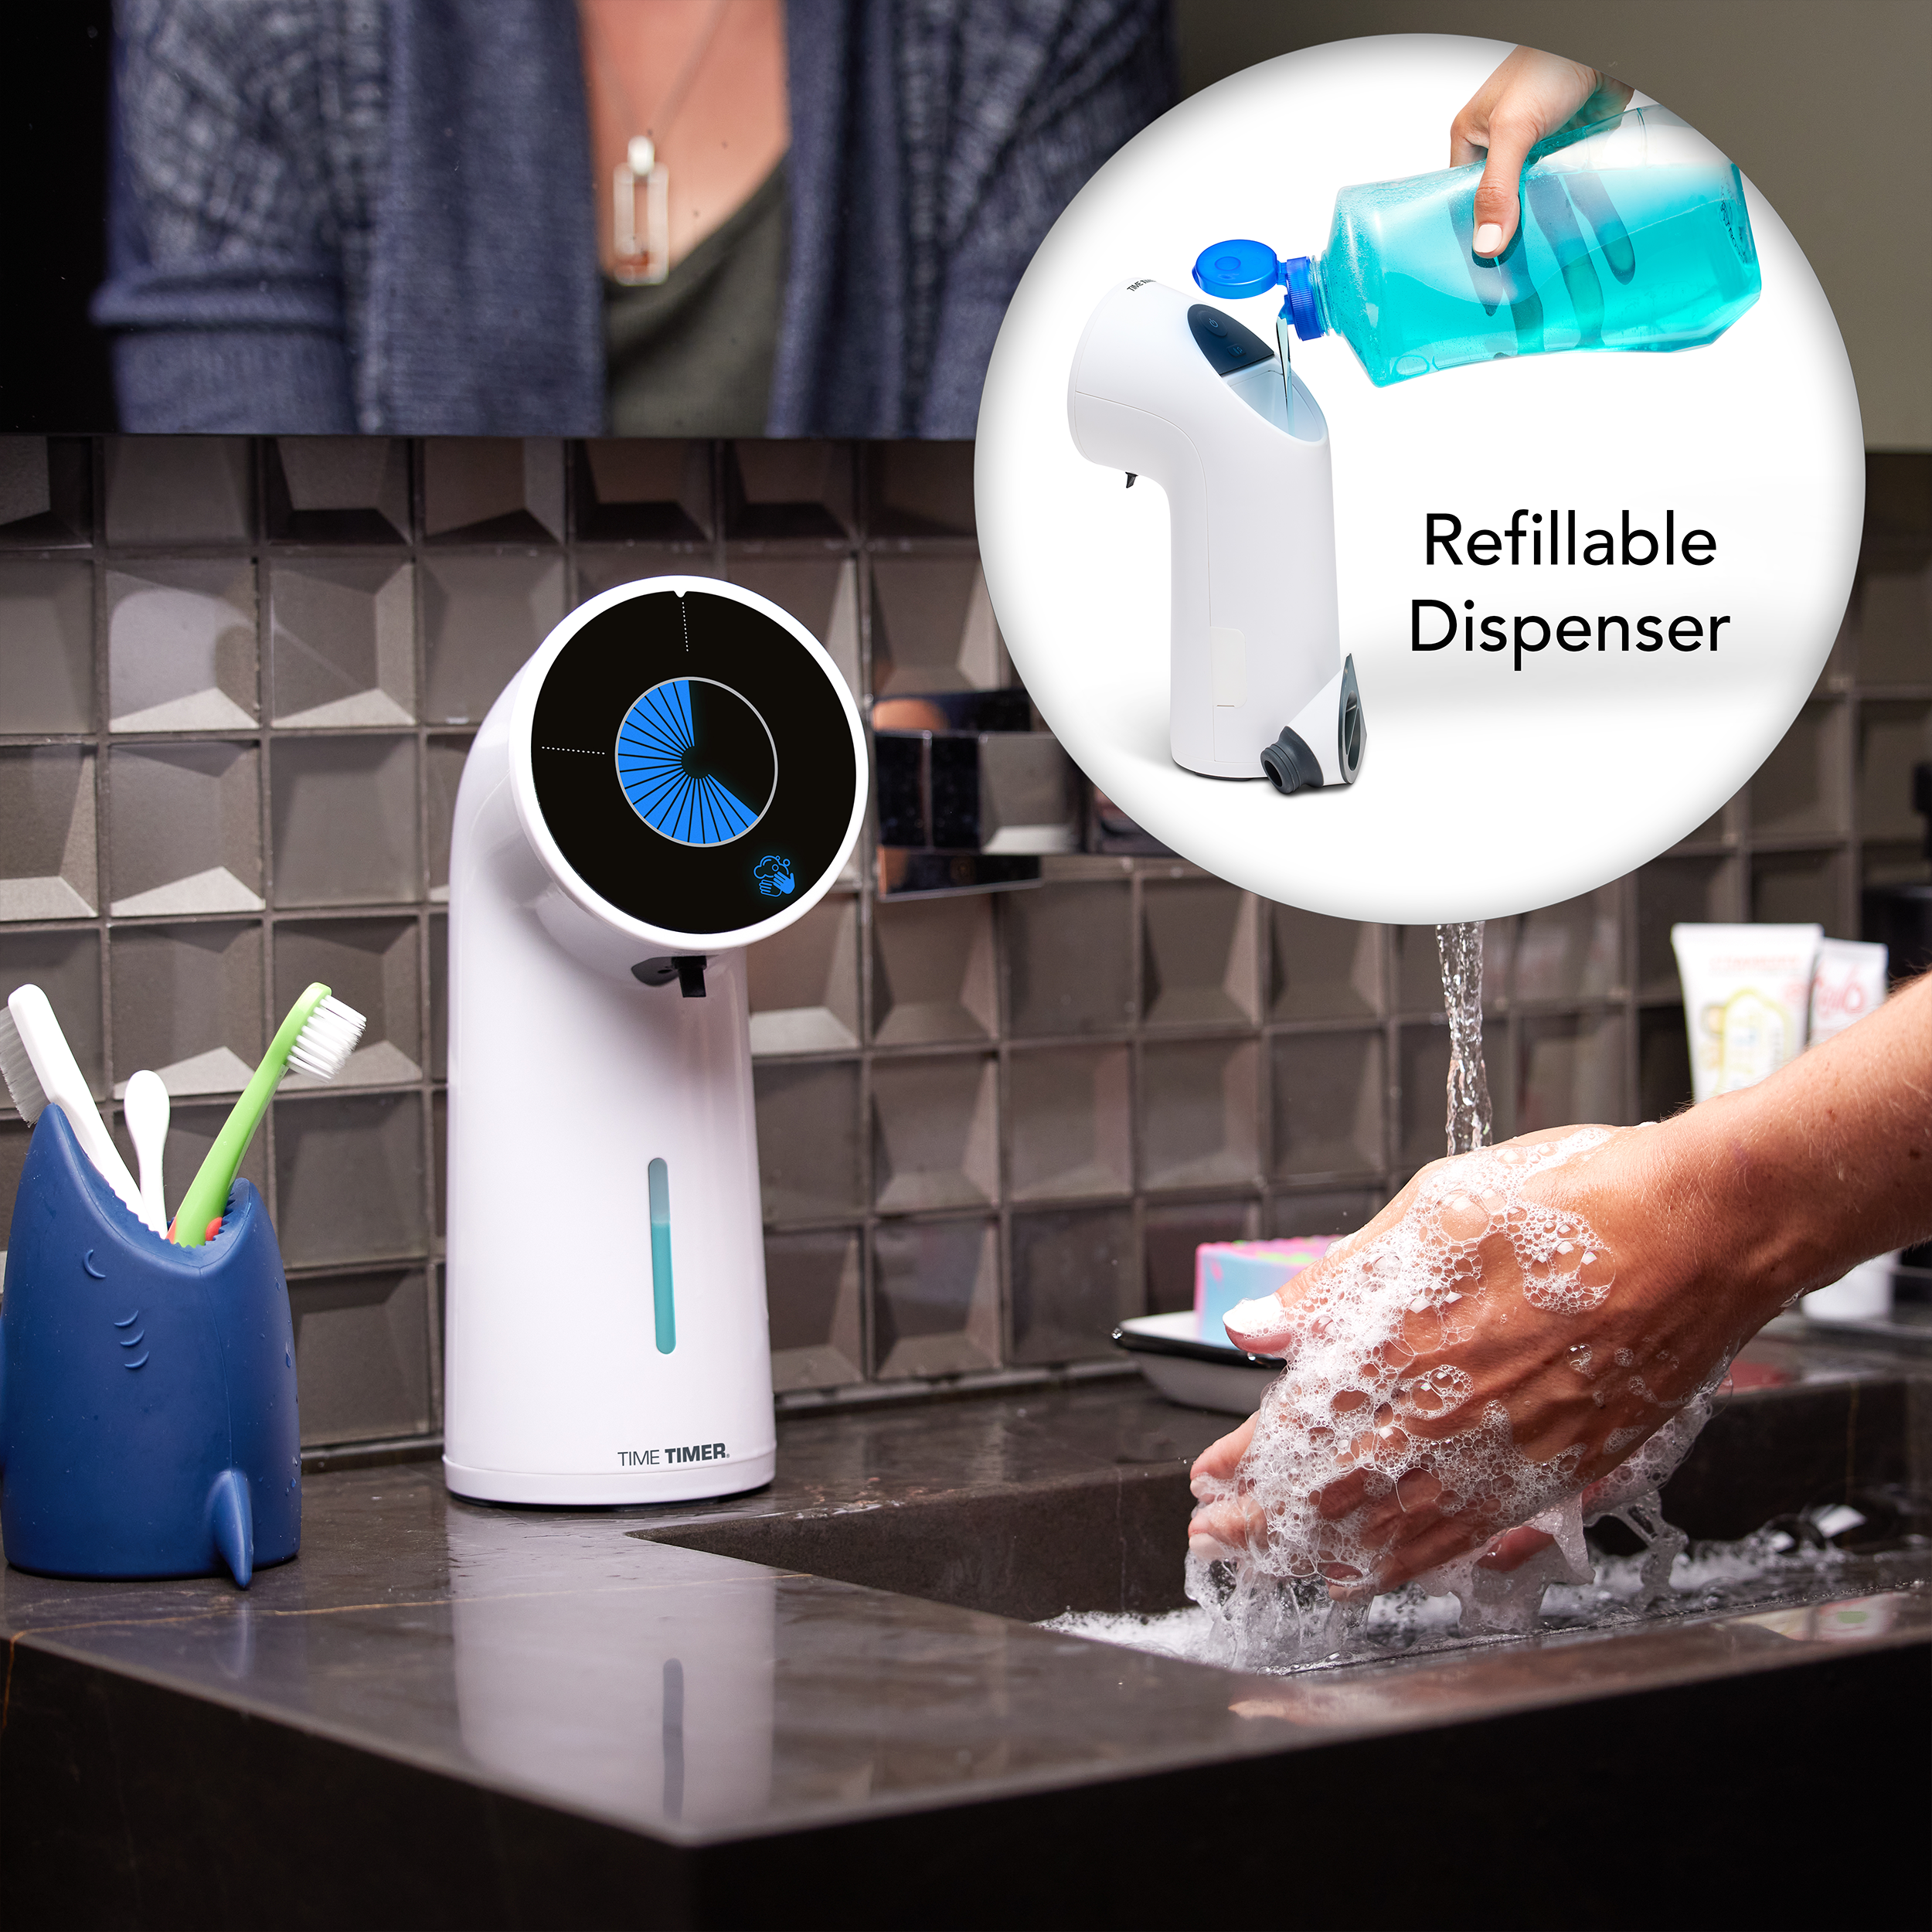 Simply Done Scrubber, Soap Dispensing